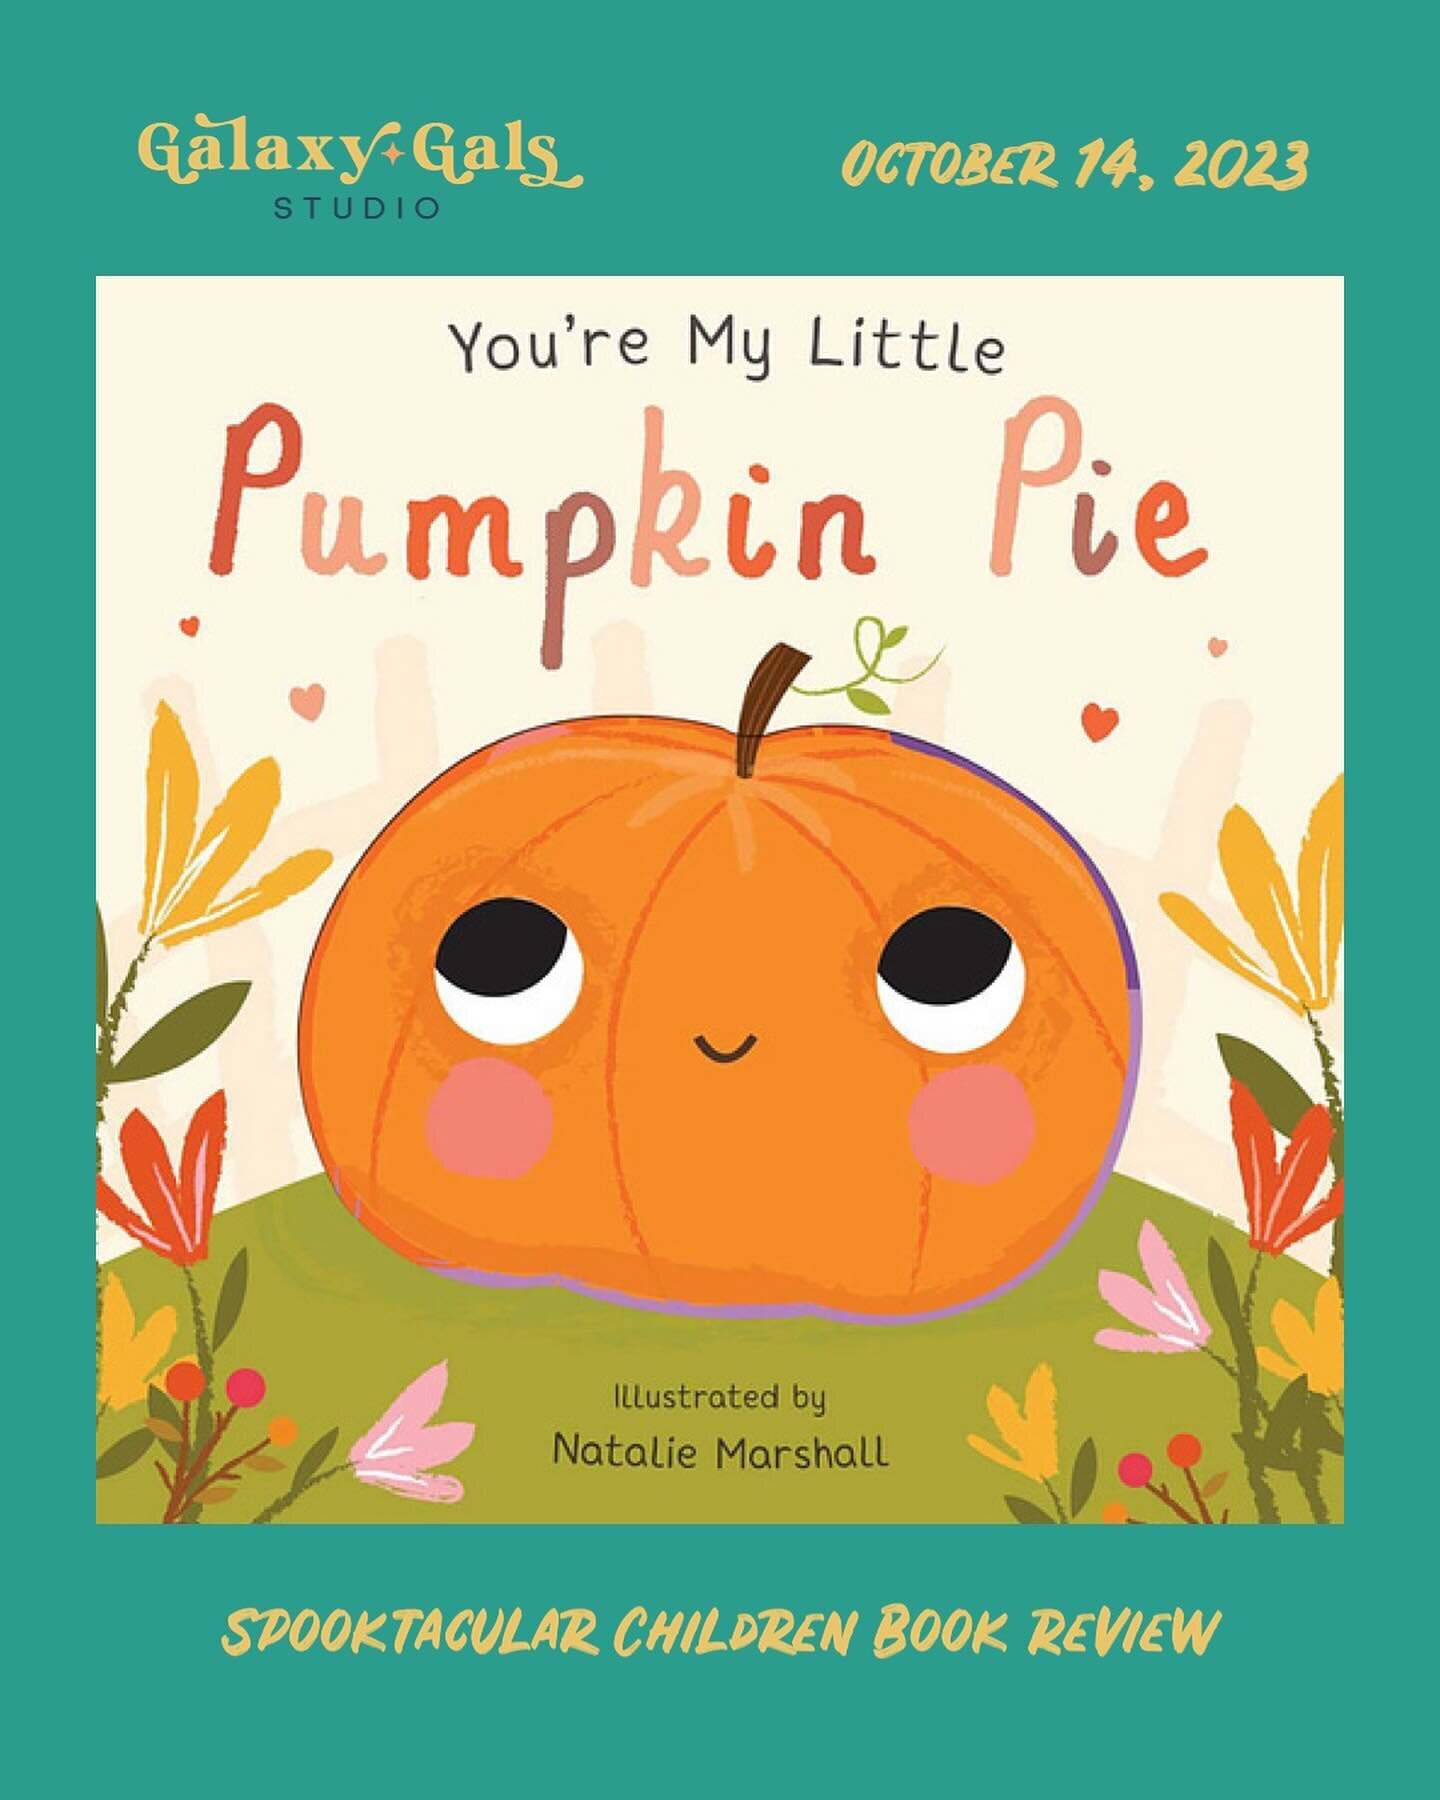 Today we&rsquo;ll be reviewing two books from one of Ashley&rsquo;s favorite series of books.

For the full review of You&rsquo;re My Little Pumpkin Pie and You&rsquo;re My Little Baby Boo by Nicola Edwards, visit our newsletter link in our bio. 

We